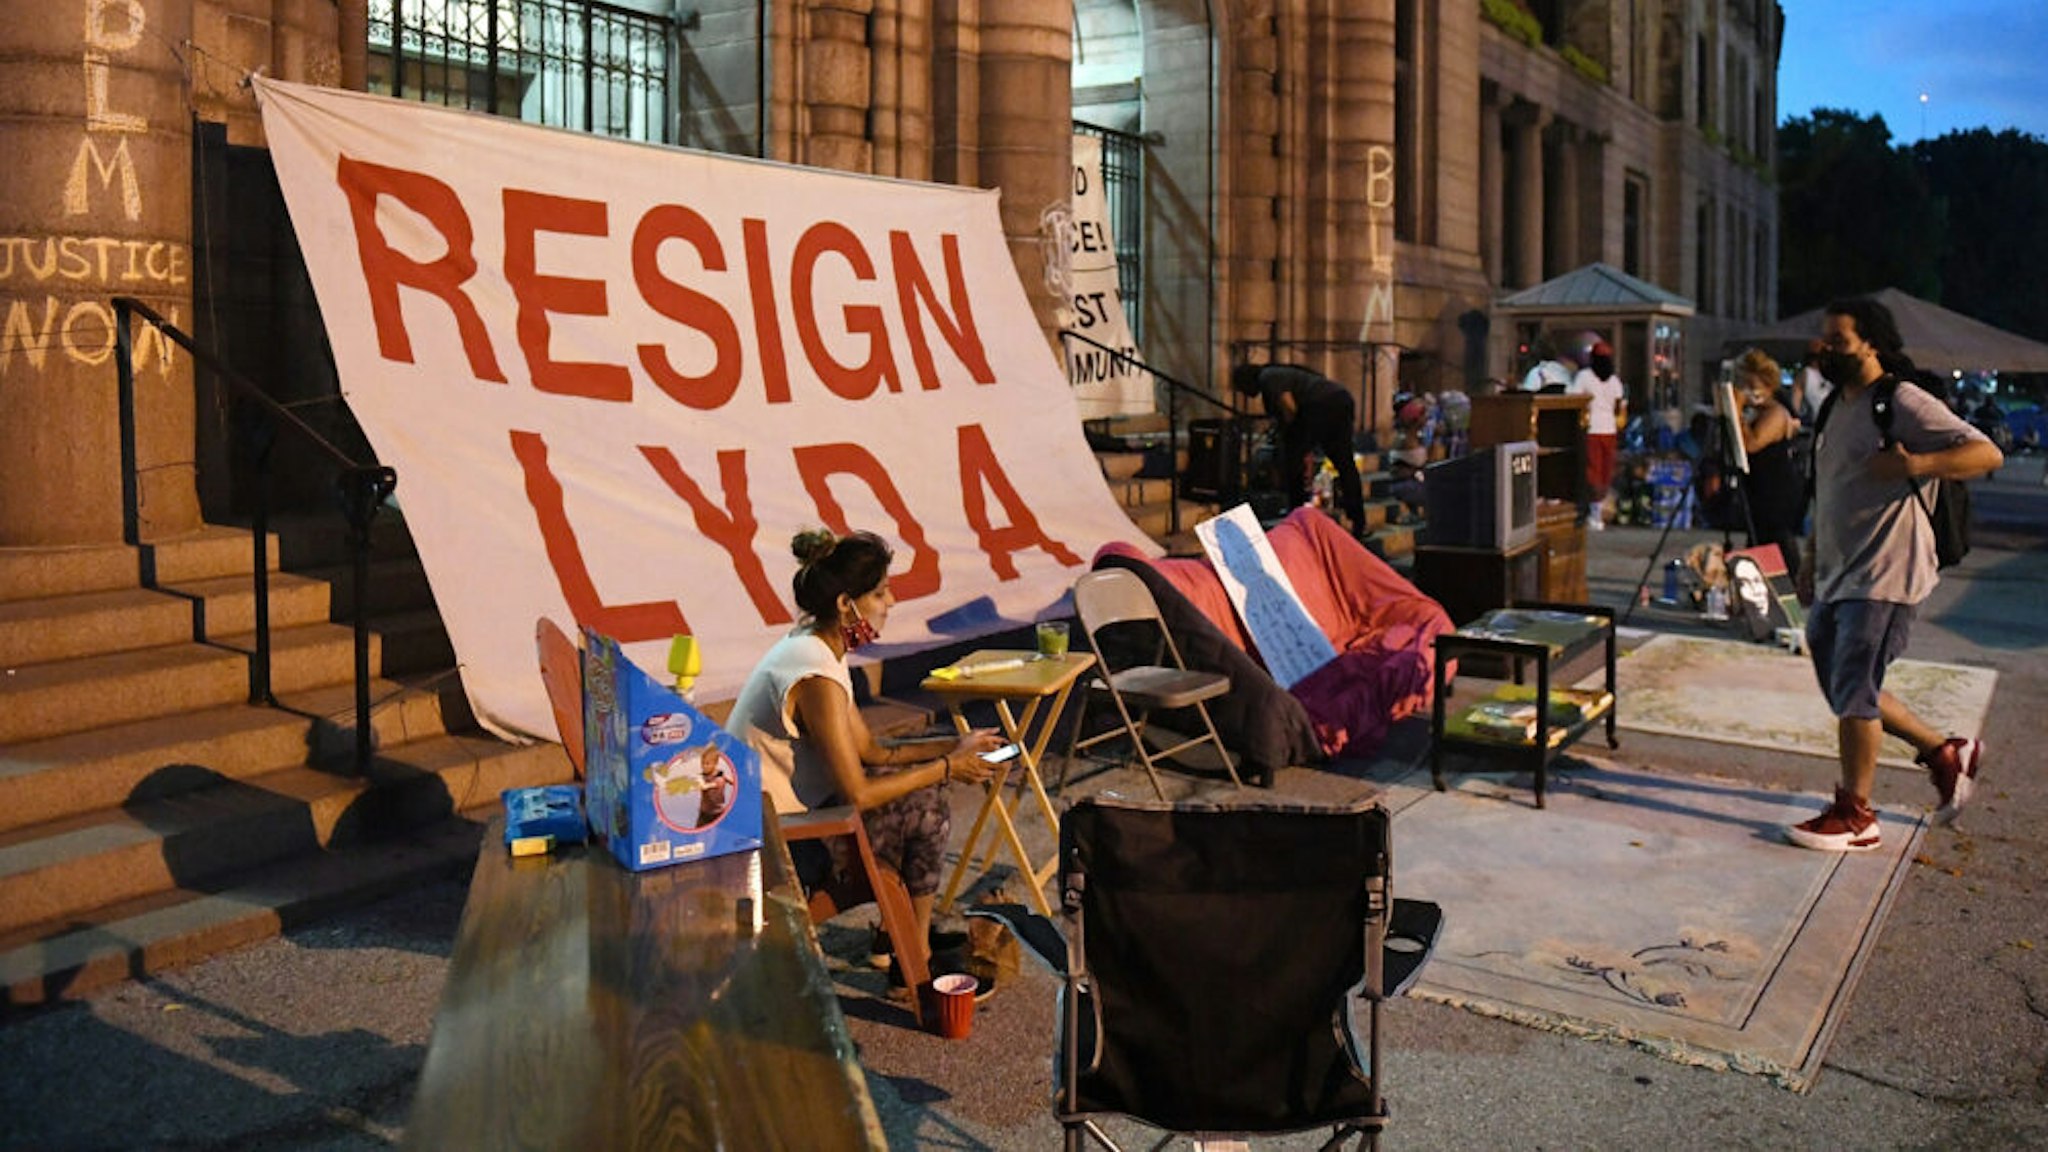 ST LOUIS, MO - JULY 09: Protesters occupy outside St. Louis City Hall on July 9, 2020 in St Louis, Missouri. Many Protesters are demanding the resignation of St. Louis City Mayor Lyda Krewson after she revealed names and addresses of Protesters calling for police reform.